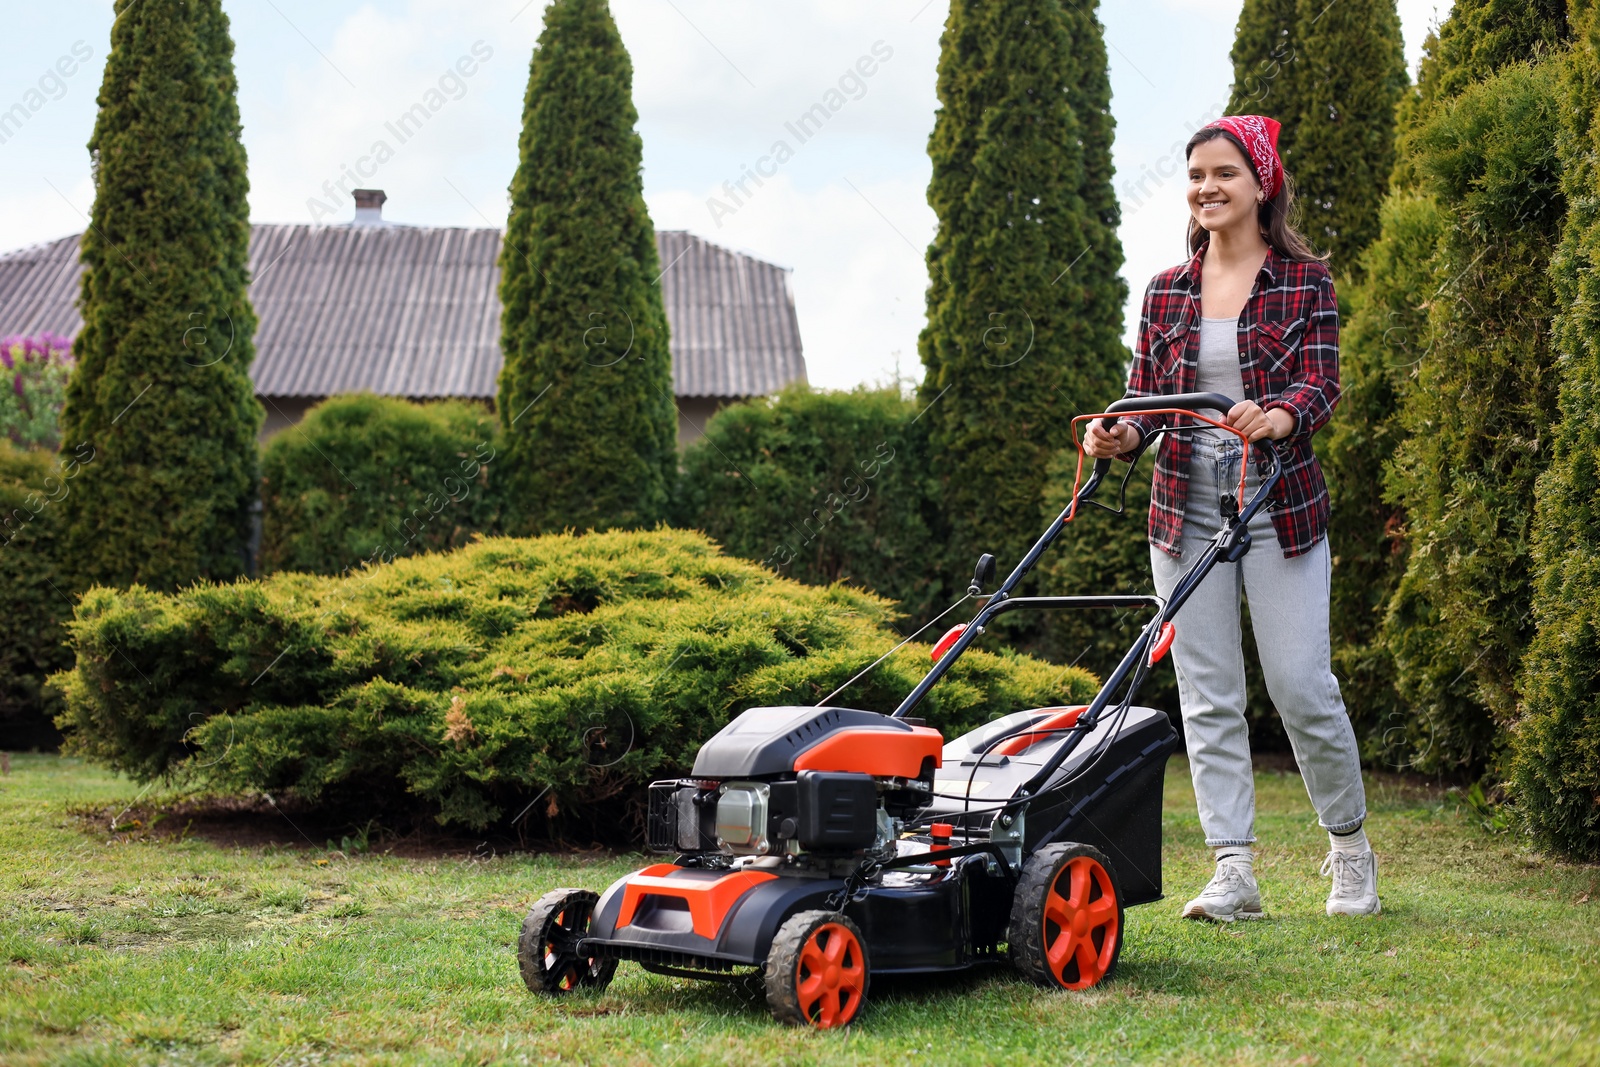 Photo of Smiling woman cutting green grass with lawn mower in garden